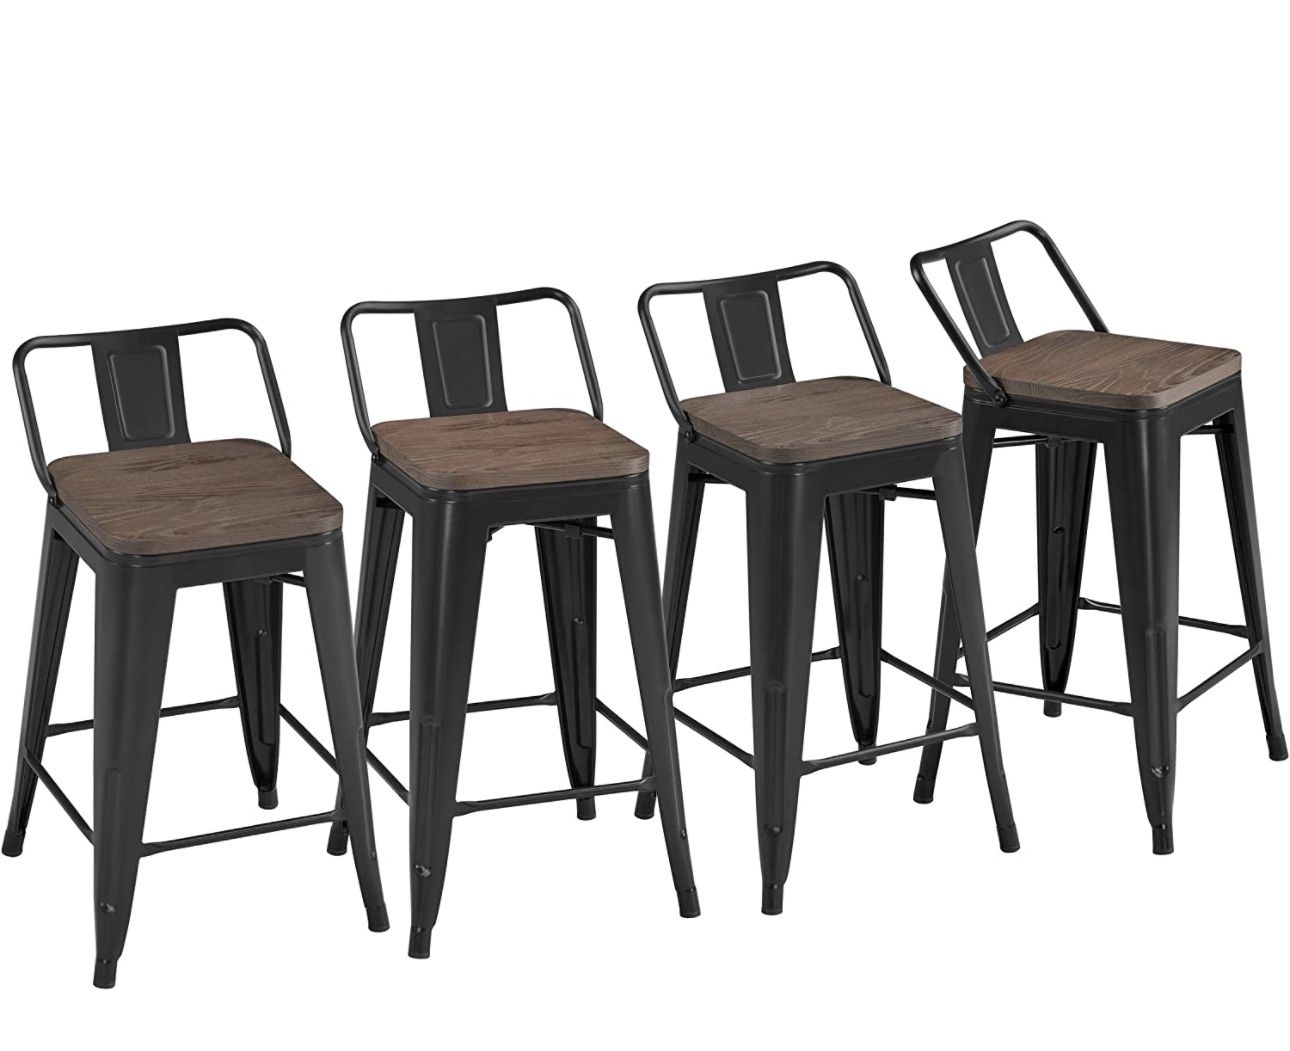 24'' Metal Bar Stool 4PCS Low Back Conuter Stools for Indoor/Outdoor Barstools Metal Black Stools Bar Chairs w/Wooden Seat Metal Leg Industrial Counte